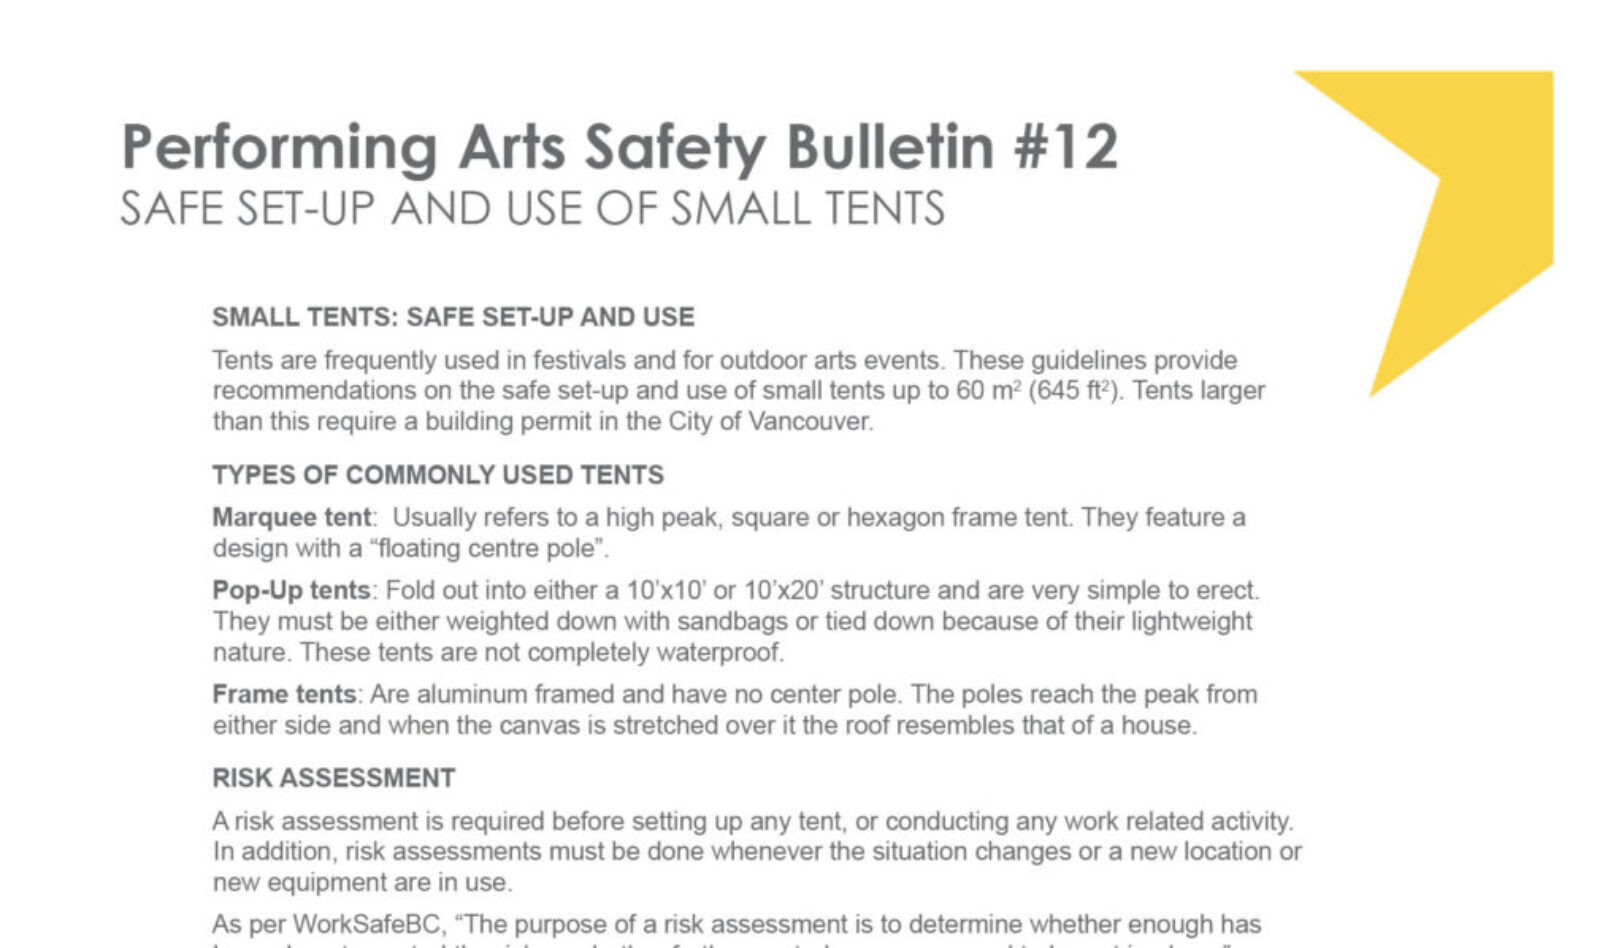 #12 Safe Set-Up and Use of Small Tents Performing Arts Safety Bulletin